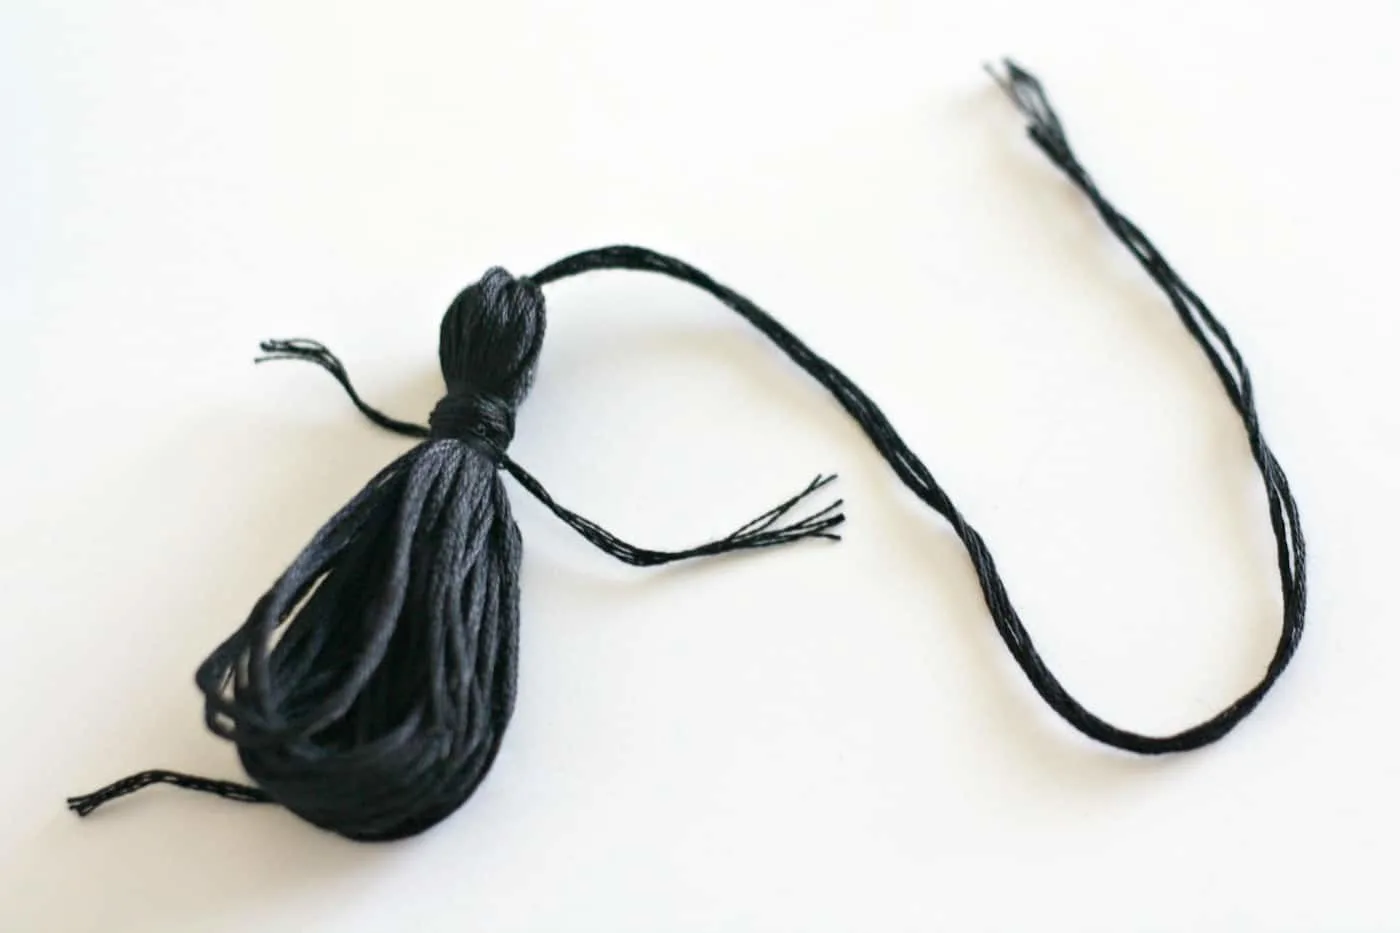 Making a tassel using black embroidery floss